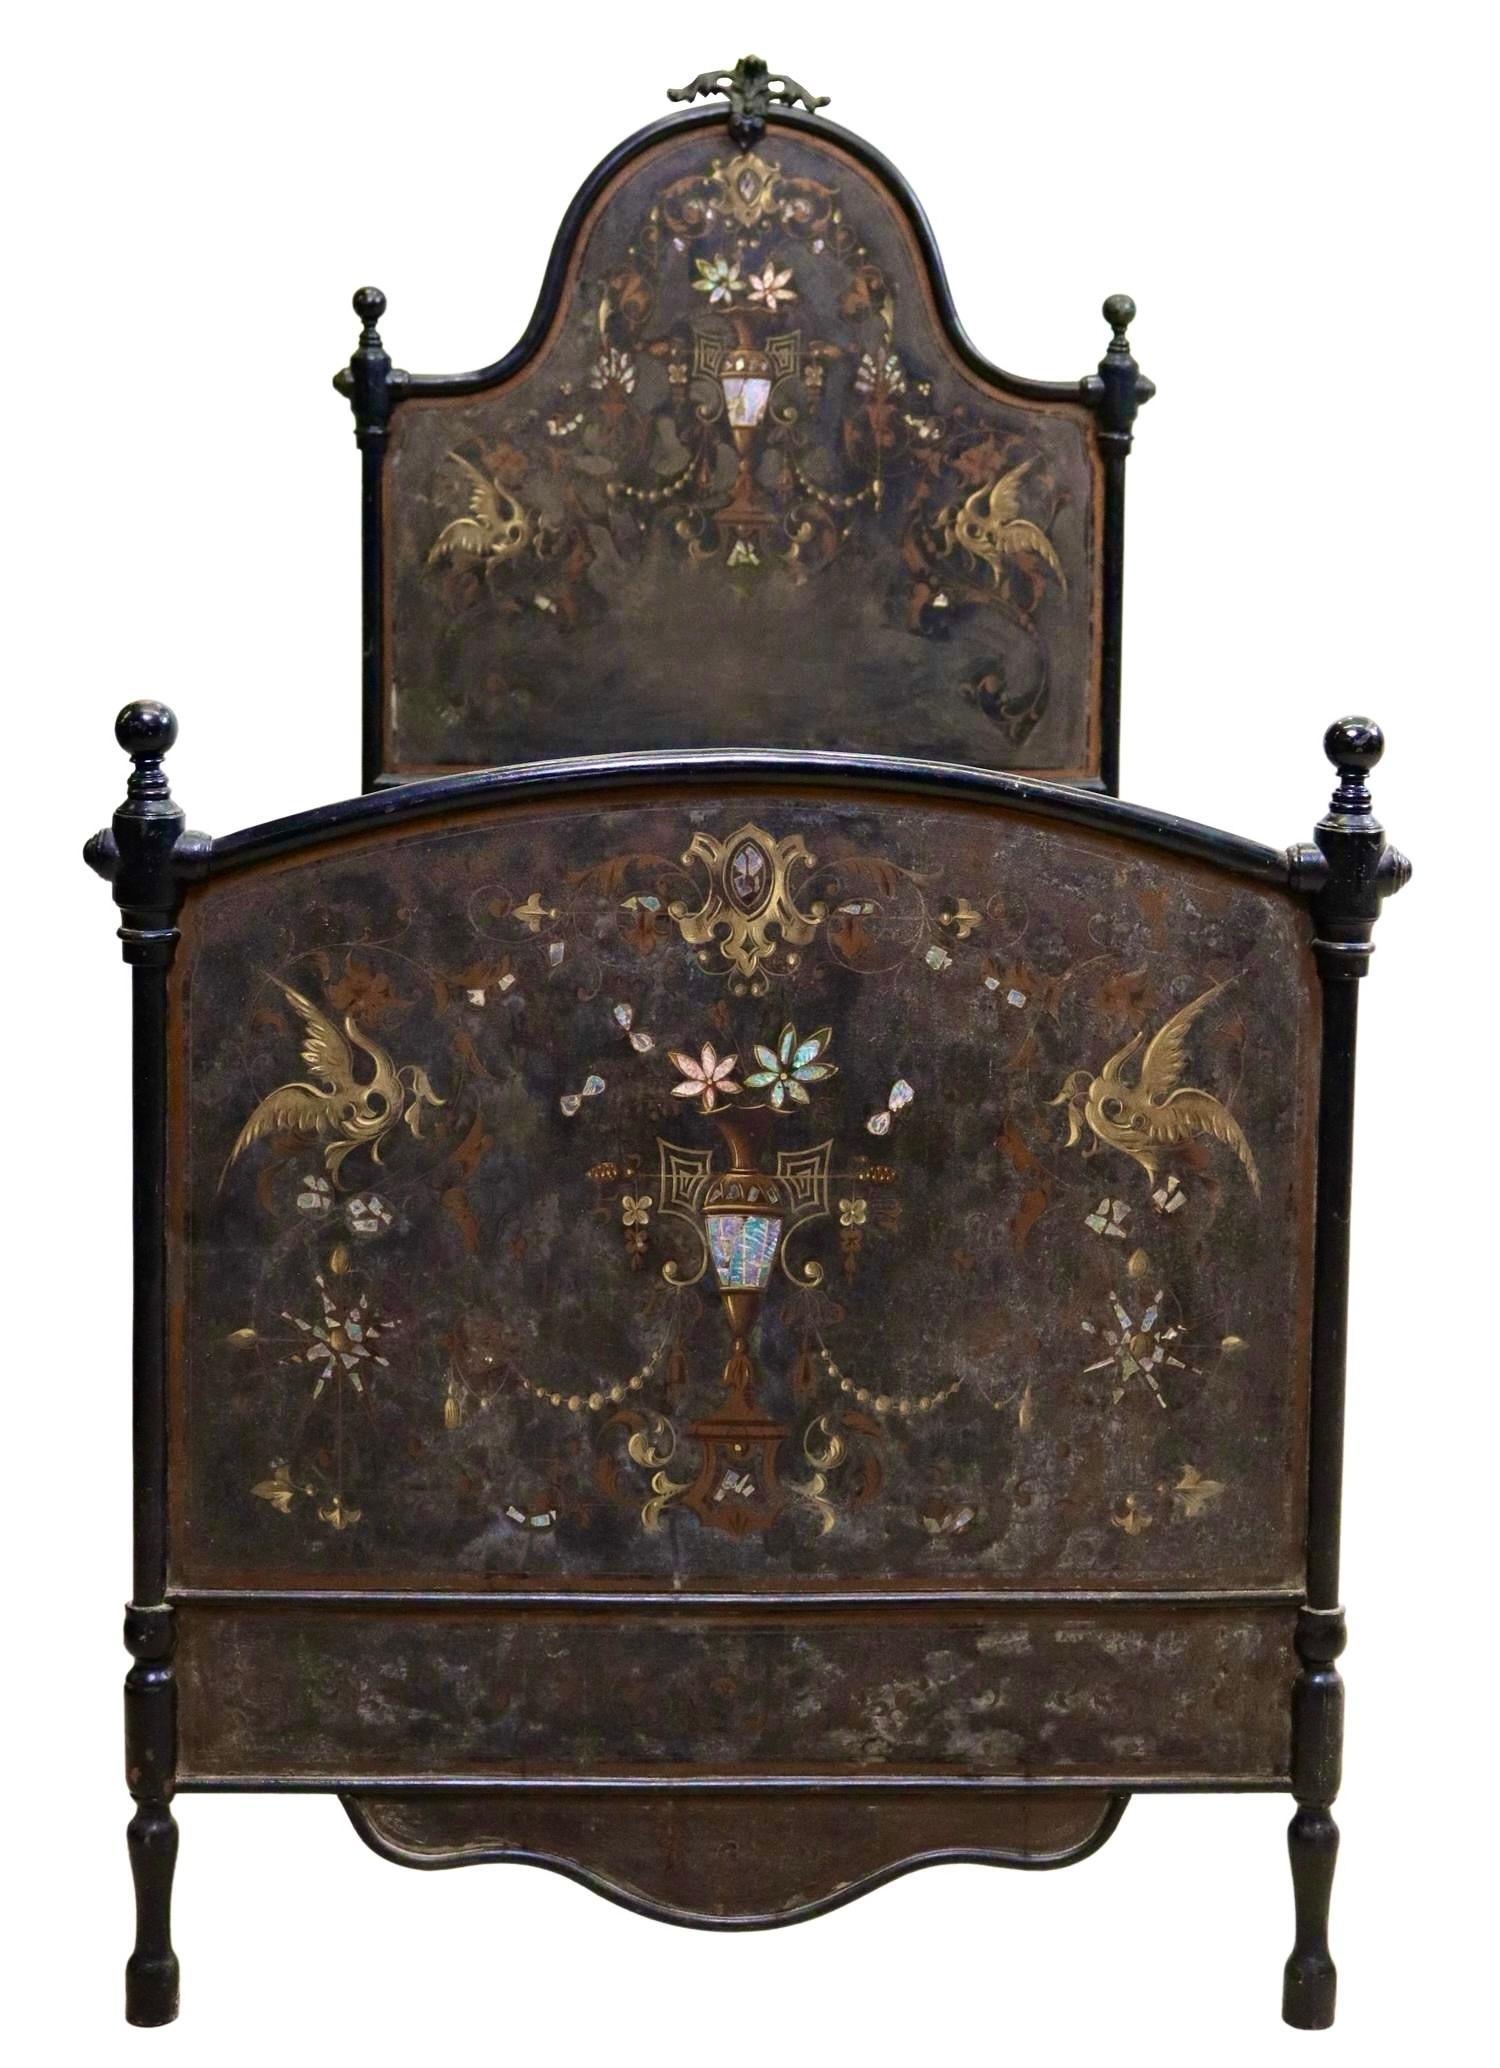 A one of a kind Italian cast iron and tole hand- painted bed from the 19th century, with applied mother-of-pearl accents, 
Tole painting is a meticulously decorative painting on objects and furniture, with a long history all over Europe specially